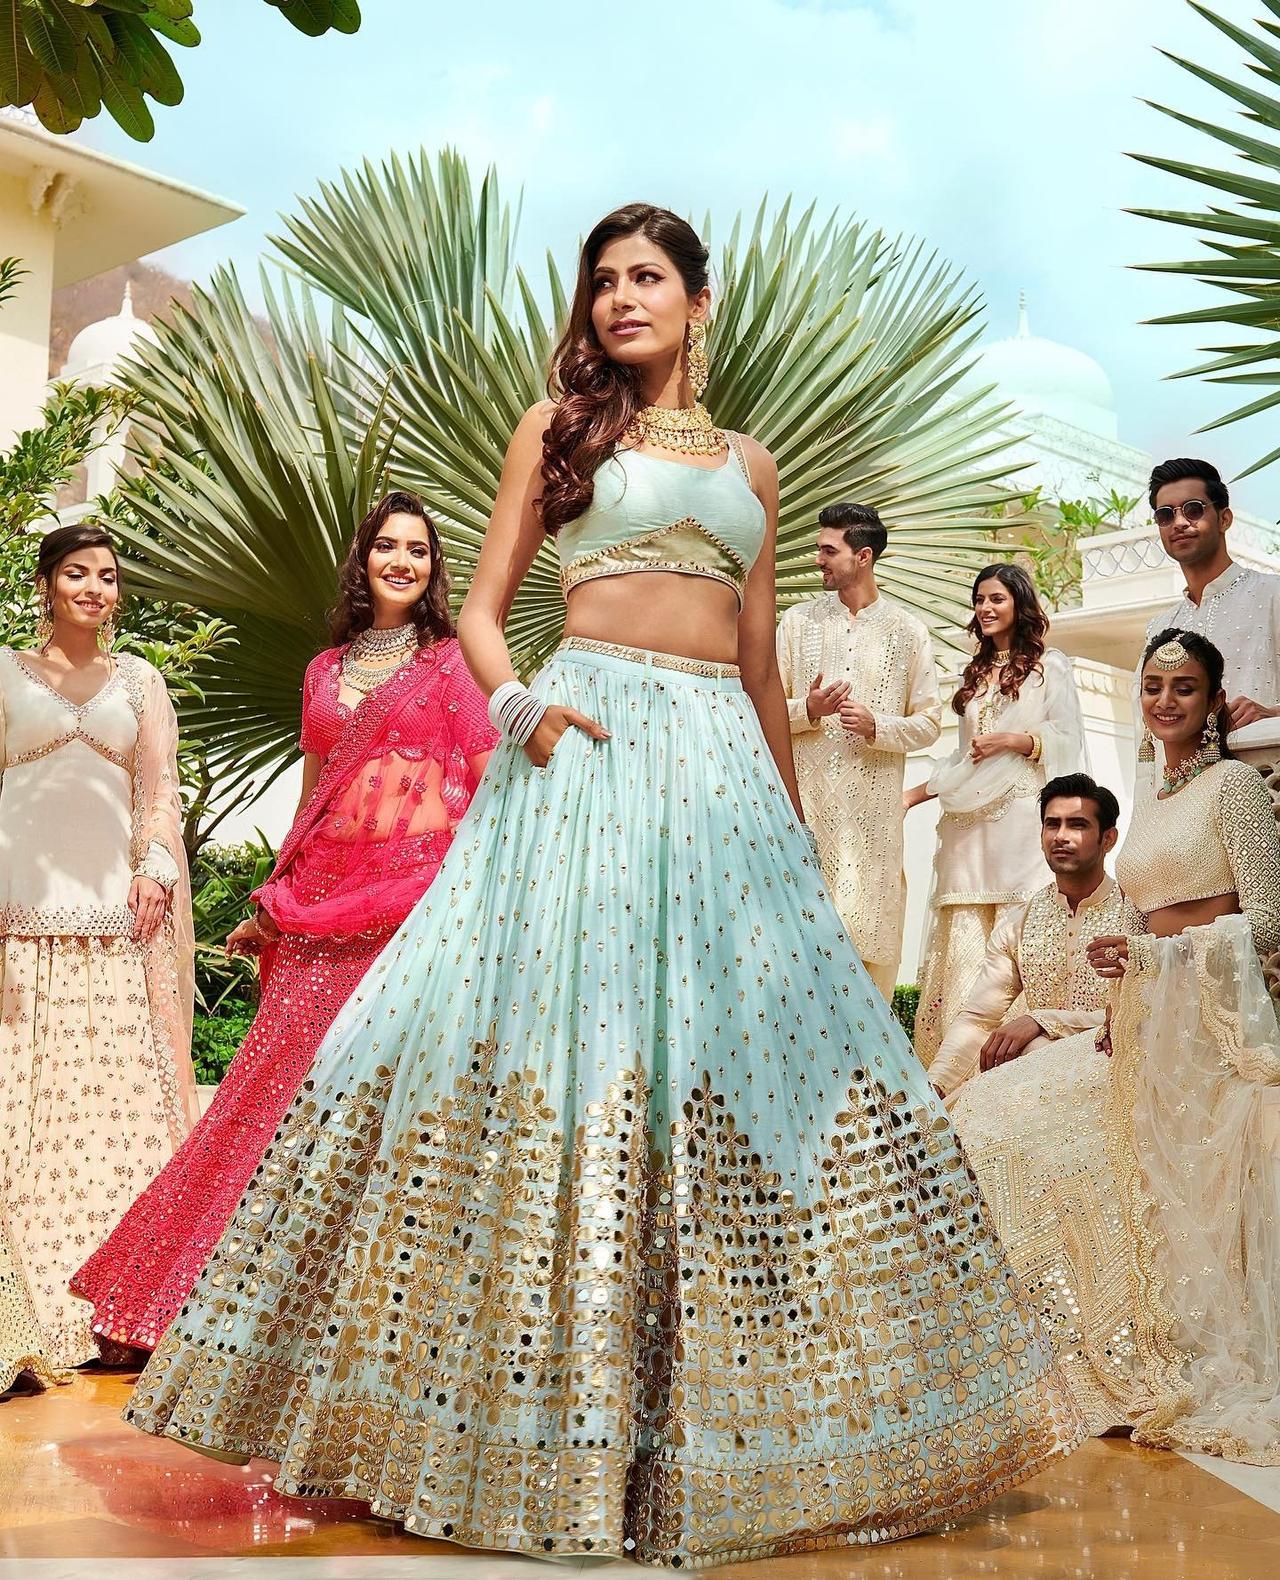 ATwomen • We are in awe of Geetika Batra Ajmani who's looking gracefully  beautiful in her Ice blue lehenga teamed up with Onion pink… | Instagram